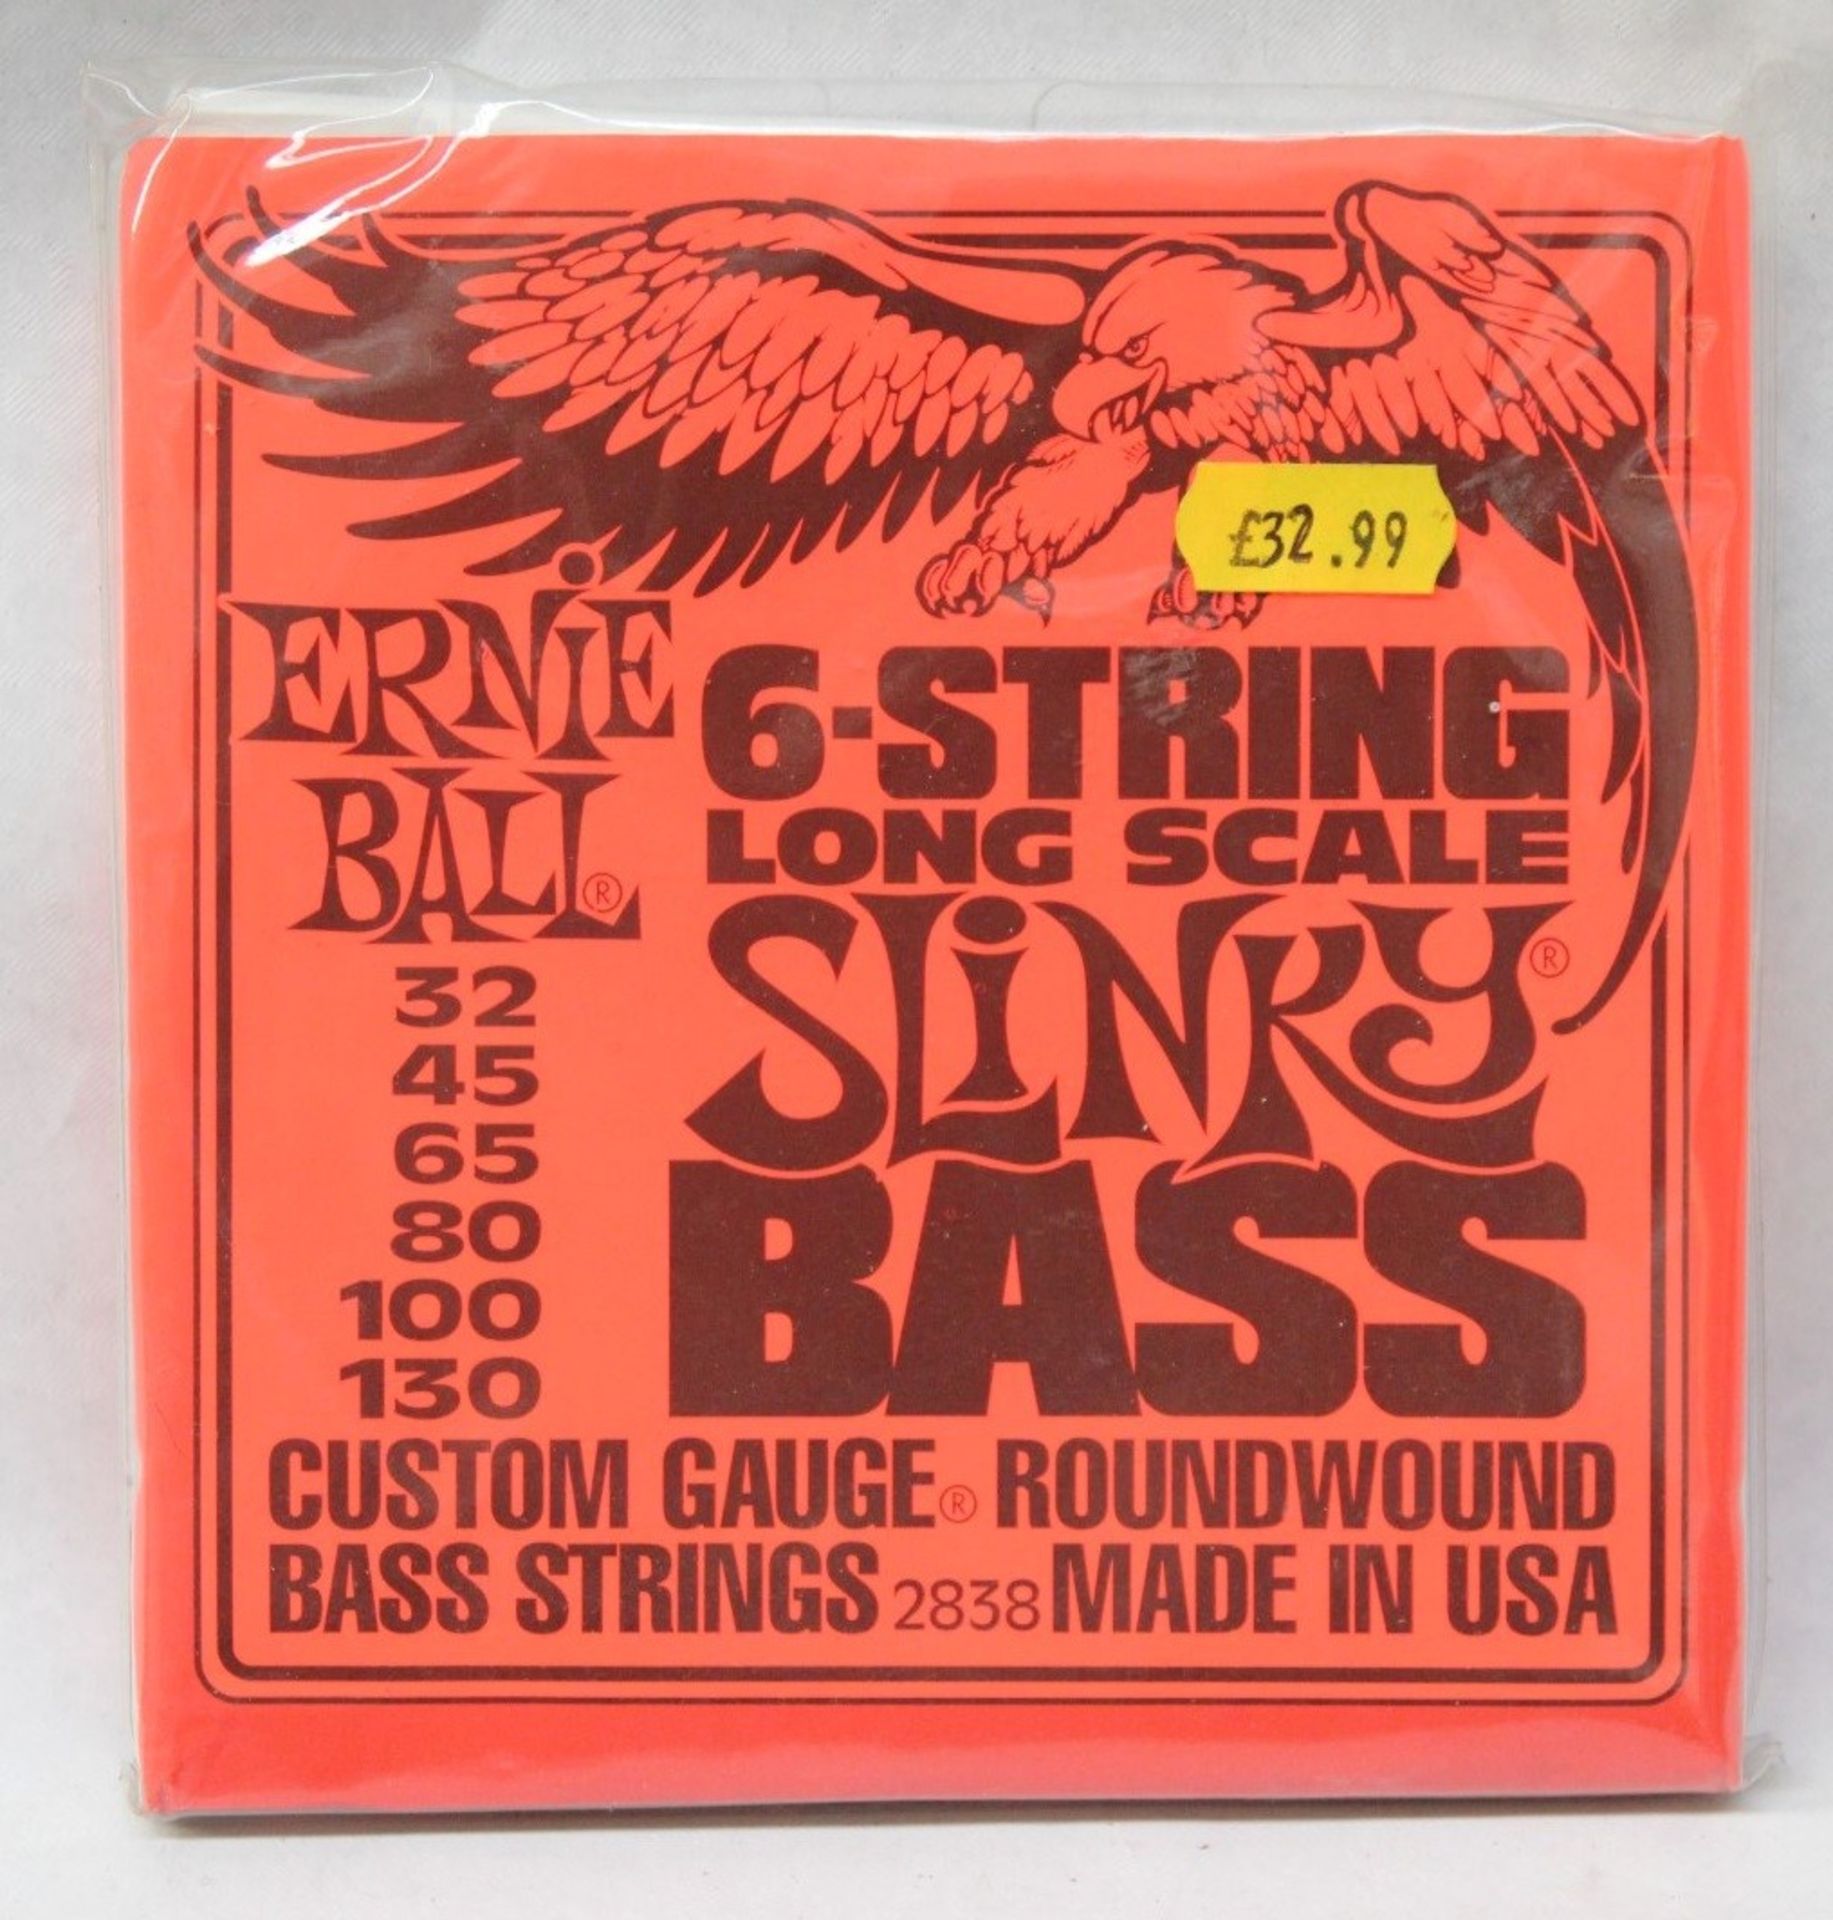 1 x Set of Ernie Ball 6 String Long Scale Slinky Bass Strings - Custom Gauge Roundwould Bass Strings - Image 4 of 4